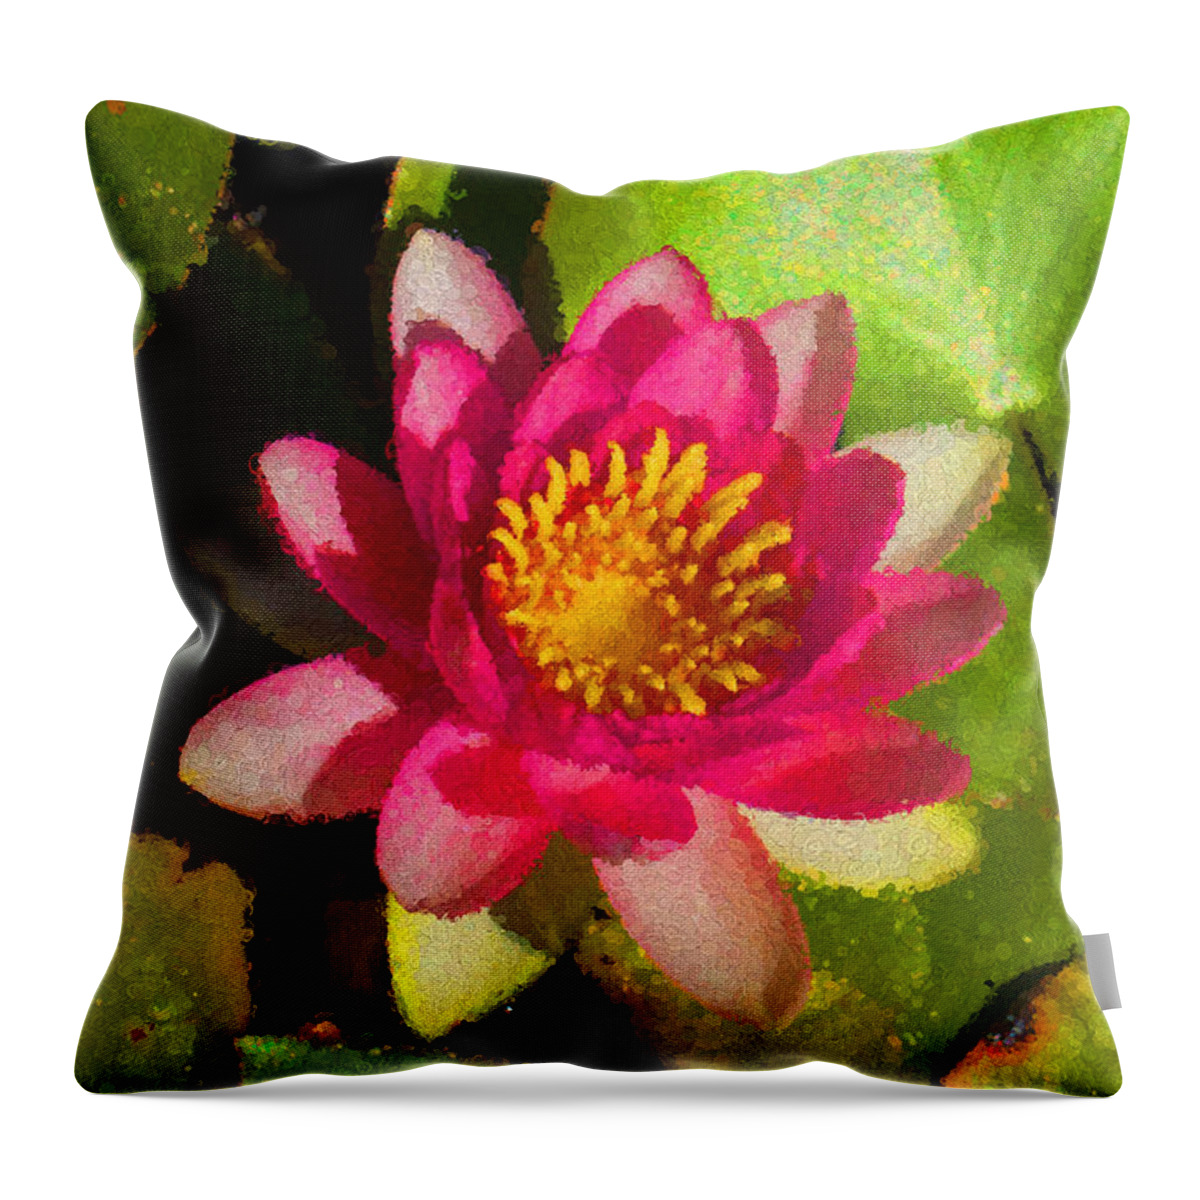 Waterlilly Throw Pillow featuring the digital art Waterlily Impression in Fuchsia and Pink by Georgia Mizuleva